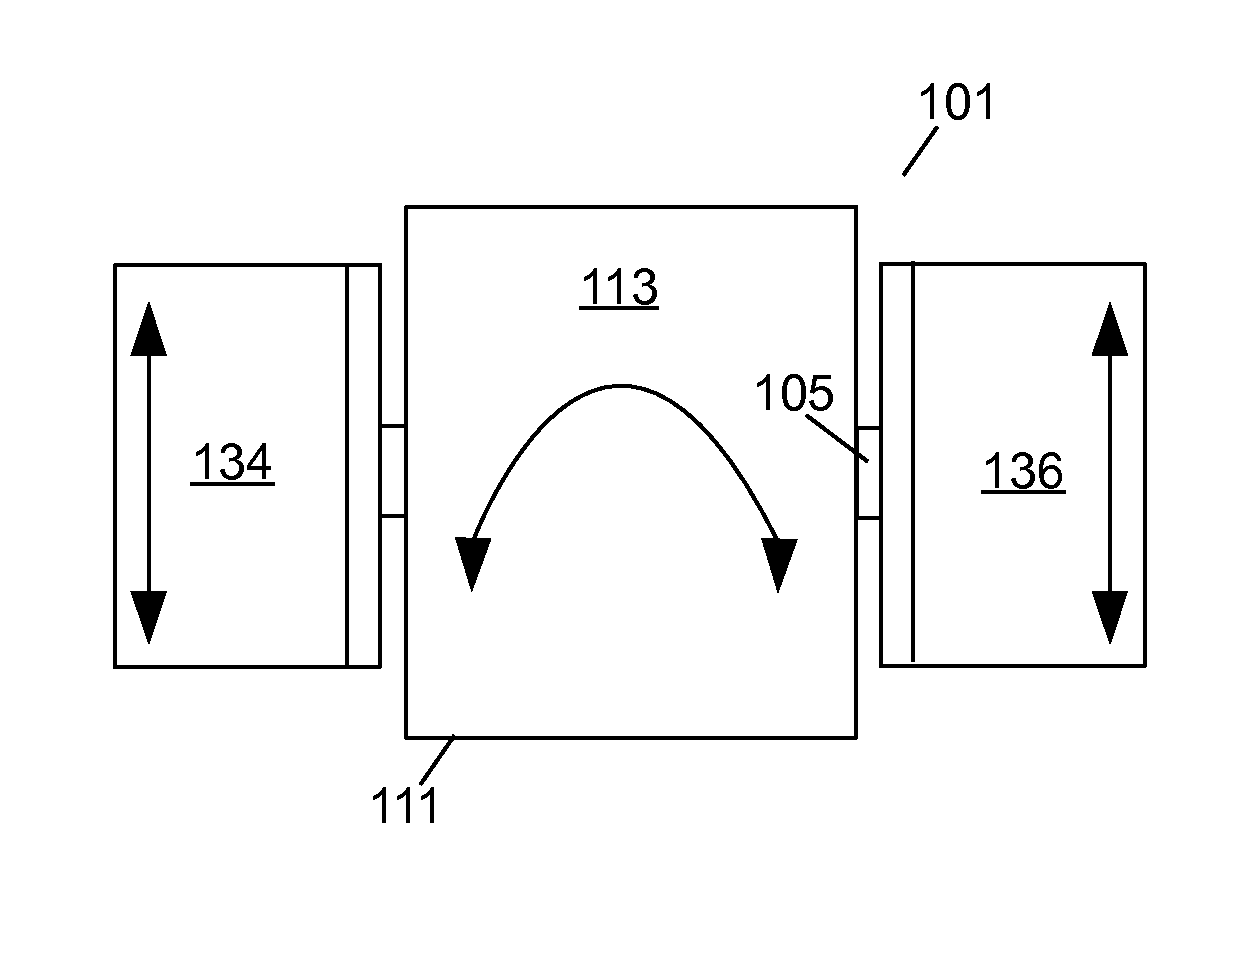 Positioning device